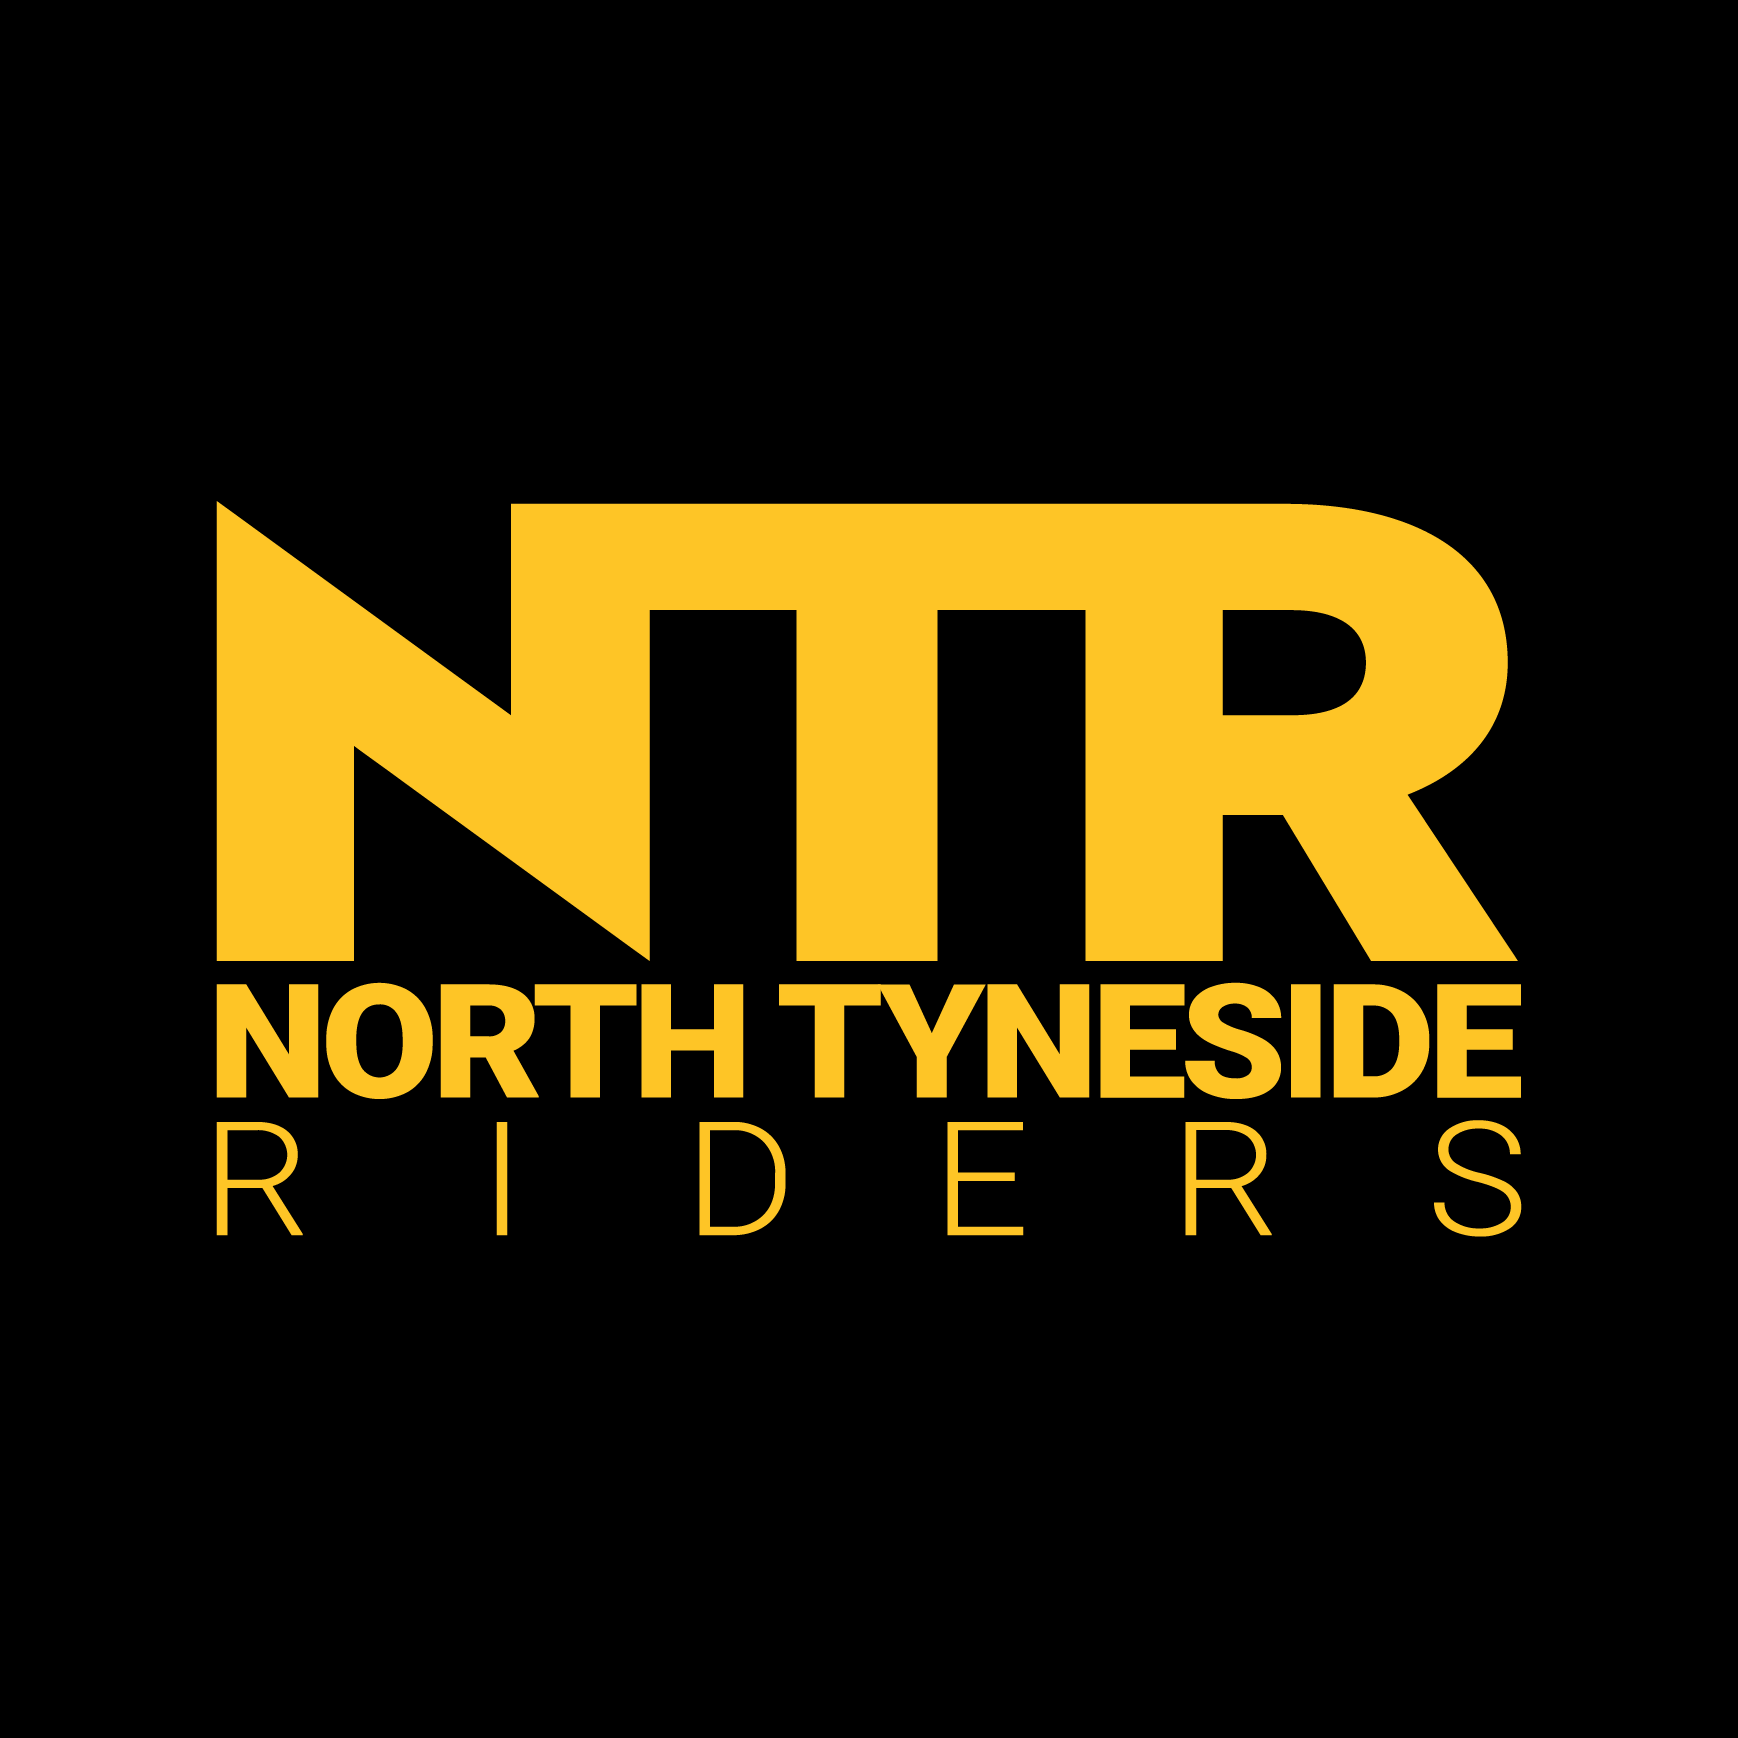 Club Image for NORTH TYNESIDE RIDERS